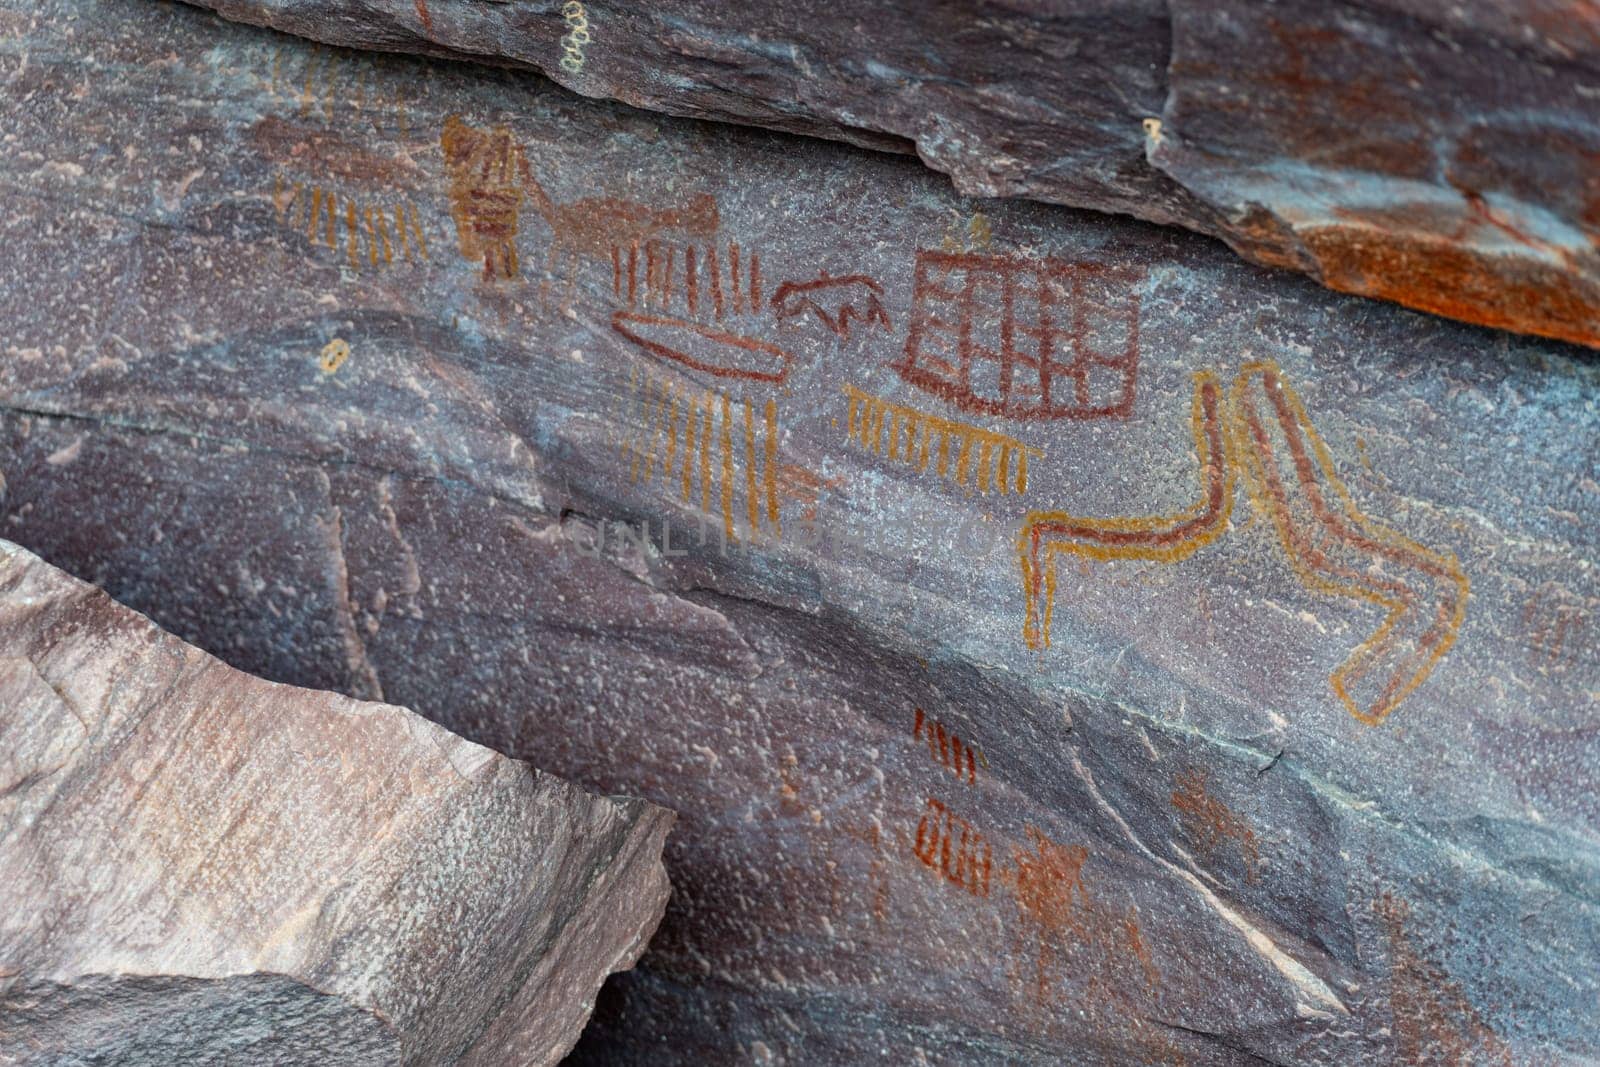 Ancient Petroglyphs Carved on Rocky Surface Revealed by FerradalFCG